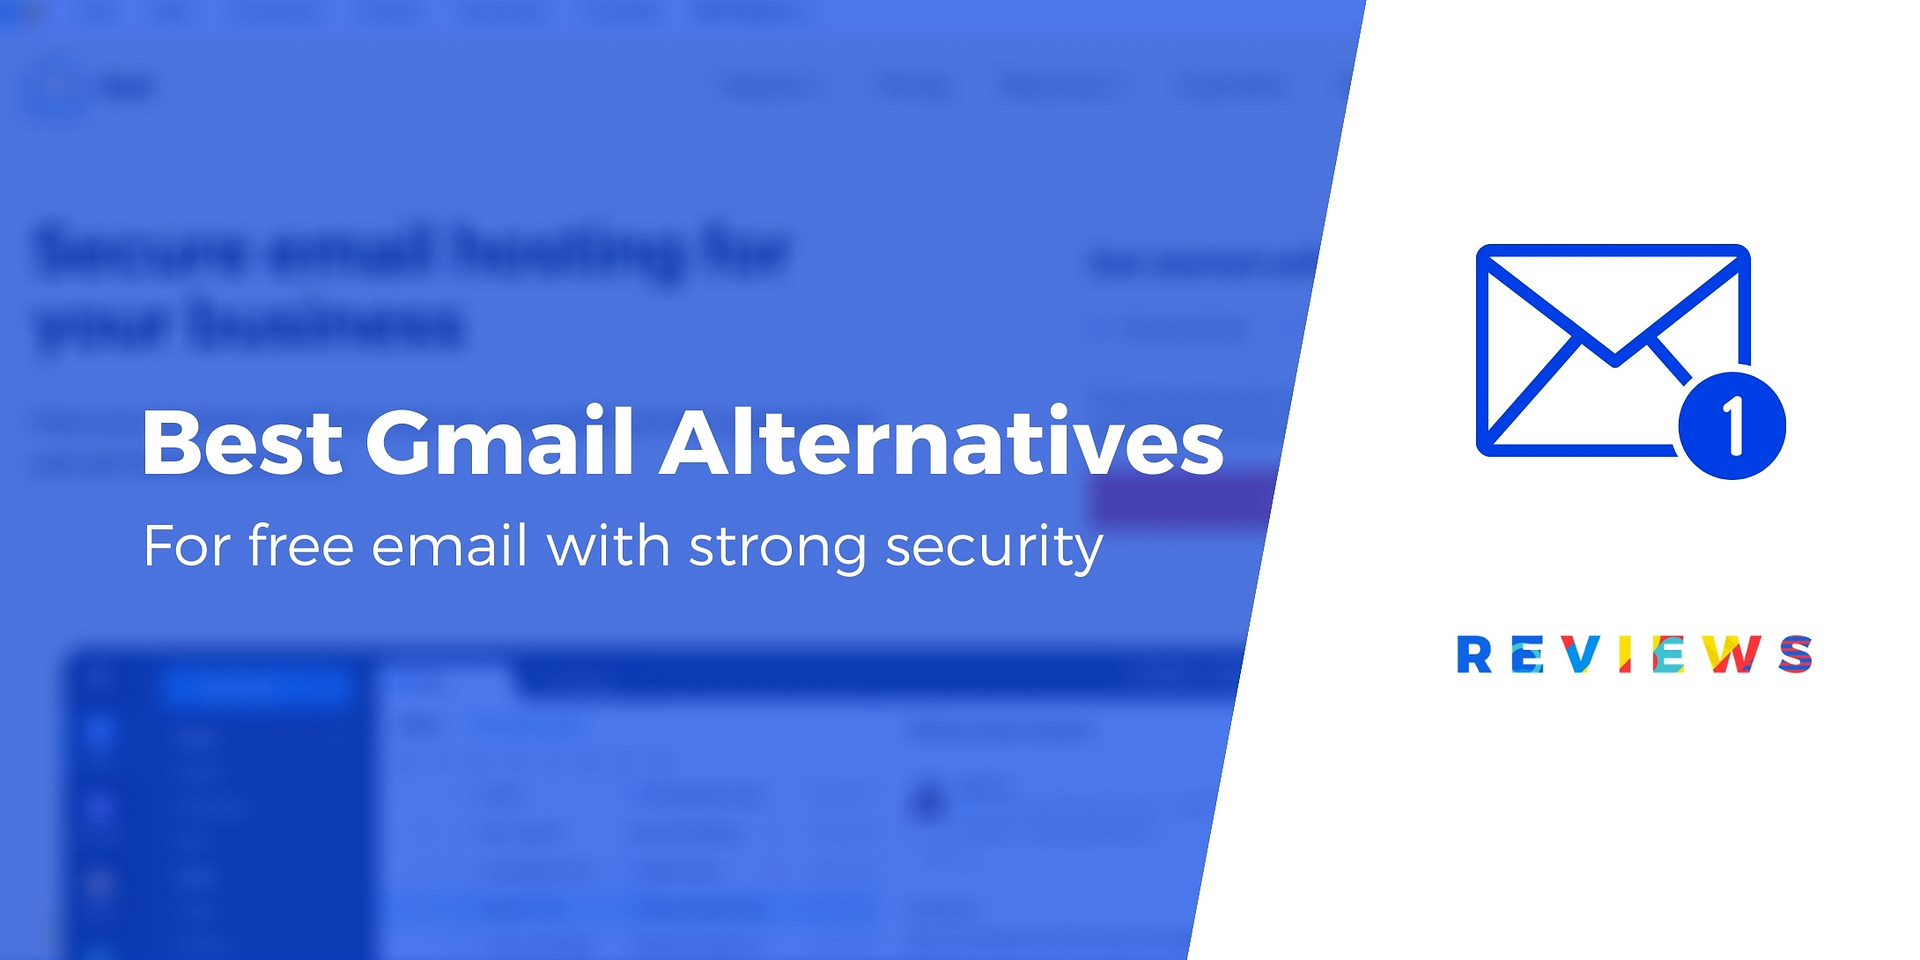 Gmail: Private and secure email at no cost